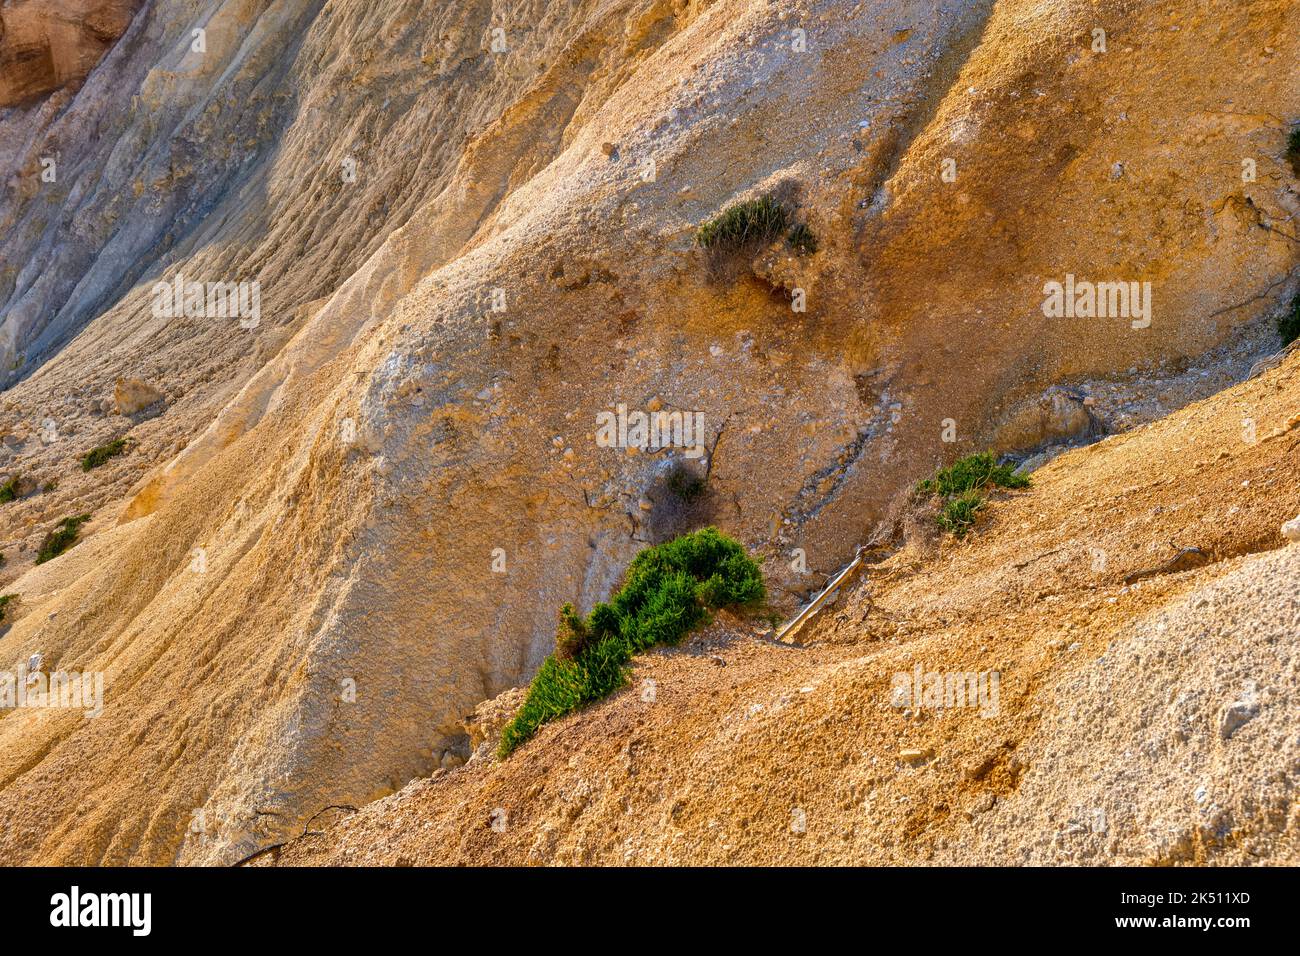 Close view of yellow sedimentary rock formations with some green grass. Sandy texture, weathered edges, sun-lit curly surface Stock Photo